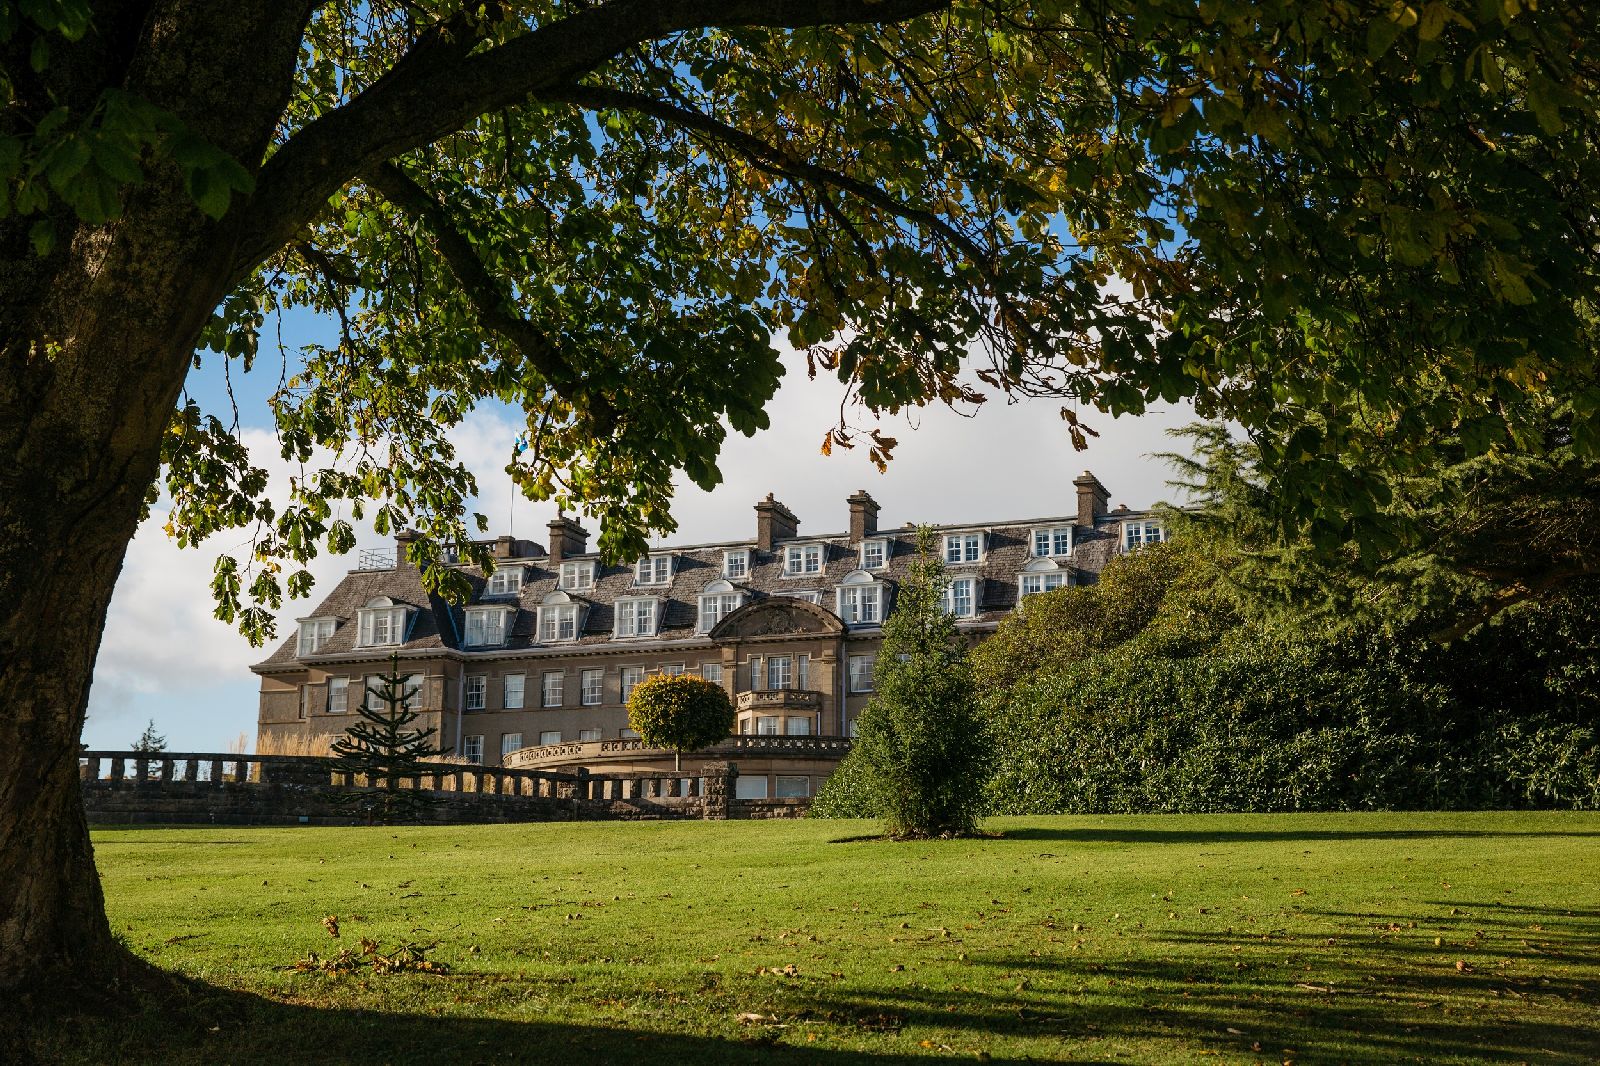 Exterior and grounds of The Gleneagles Hotel in Scotland